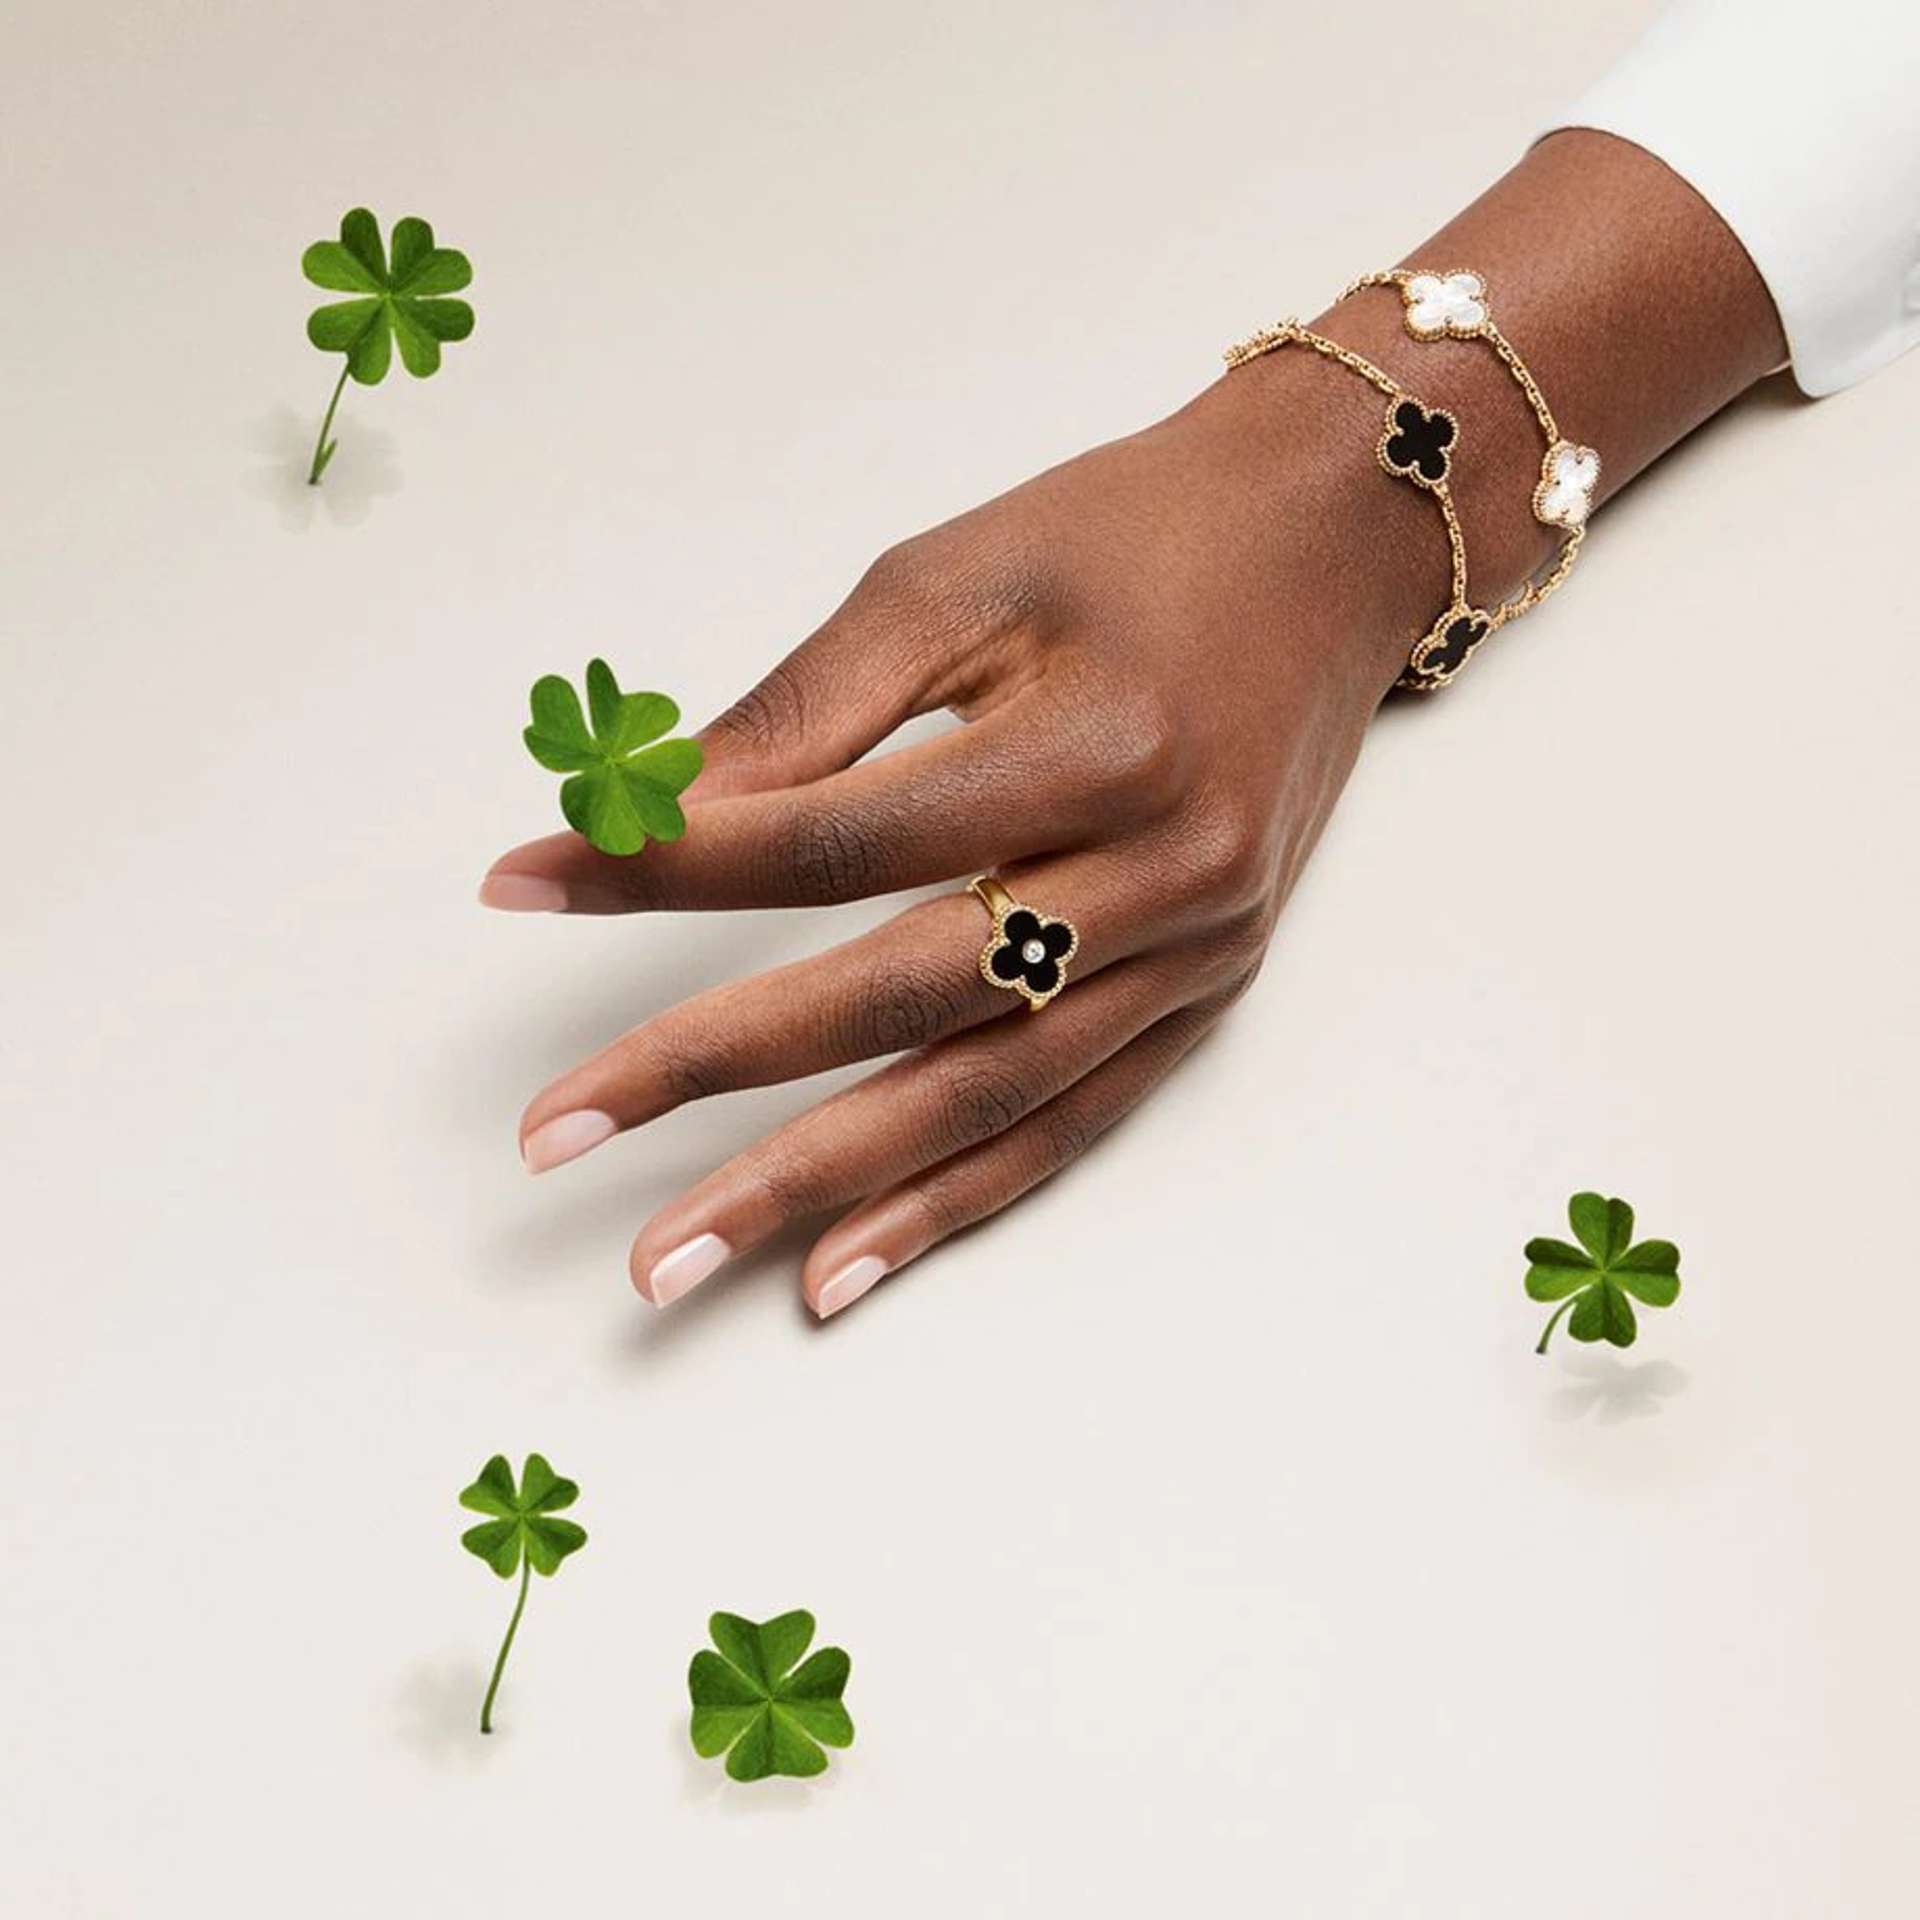 Image of a hand holding four leaf clover with 4 other clovers surrounding the hand, wearing a black clover ring and two bracelets - one gold and black, and the other pearl and gold